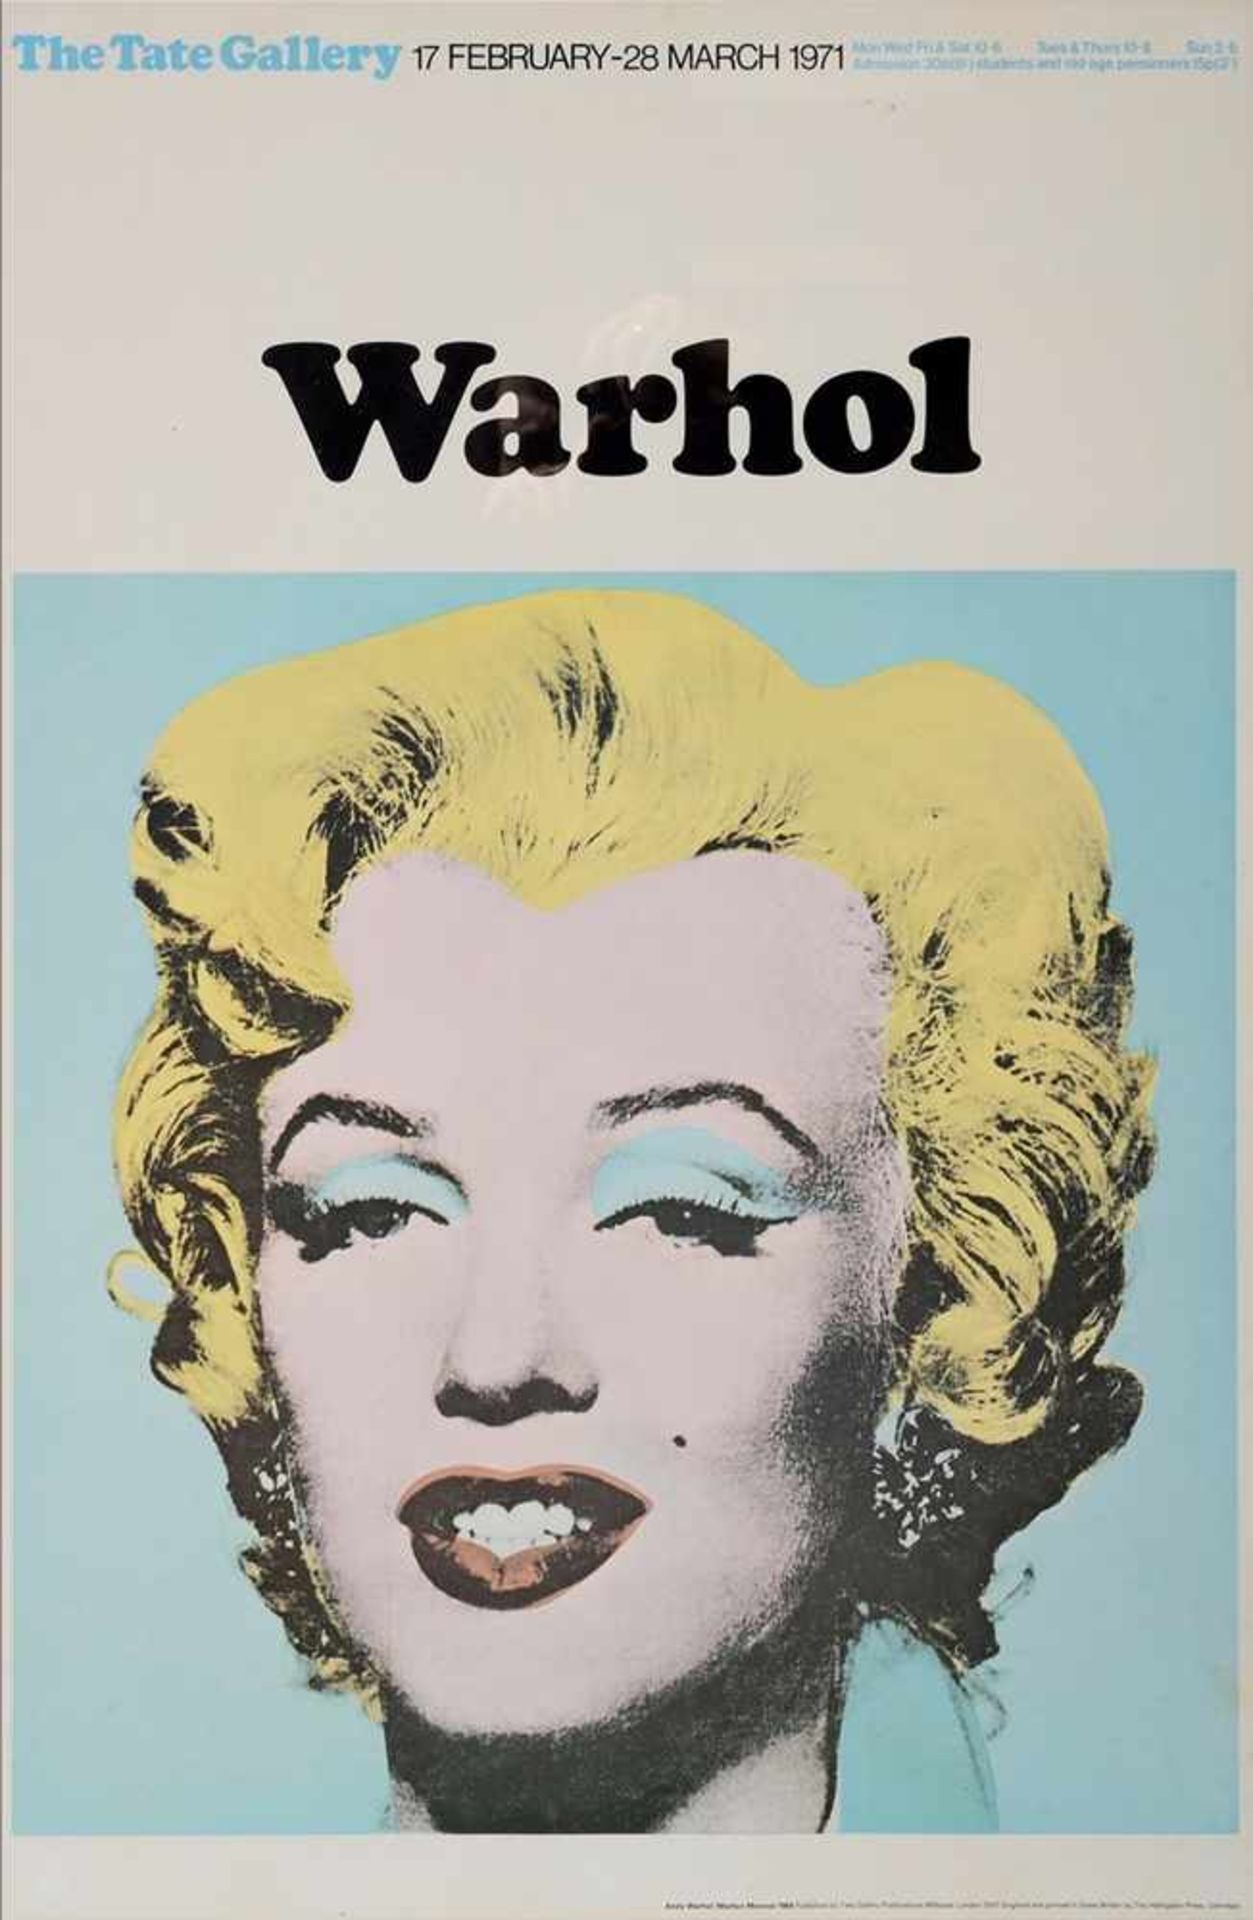 2 Diverse Warhol, Andy (1928-1987) "Turquoise Marilyn" Offsetlithographie Poster der Tate Gallery - Image 2 of 5